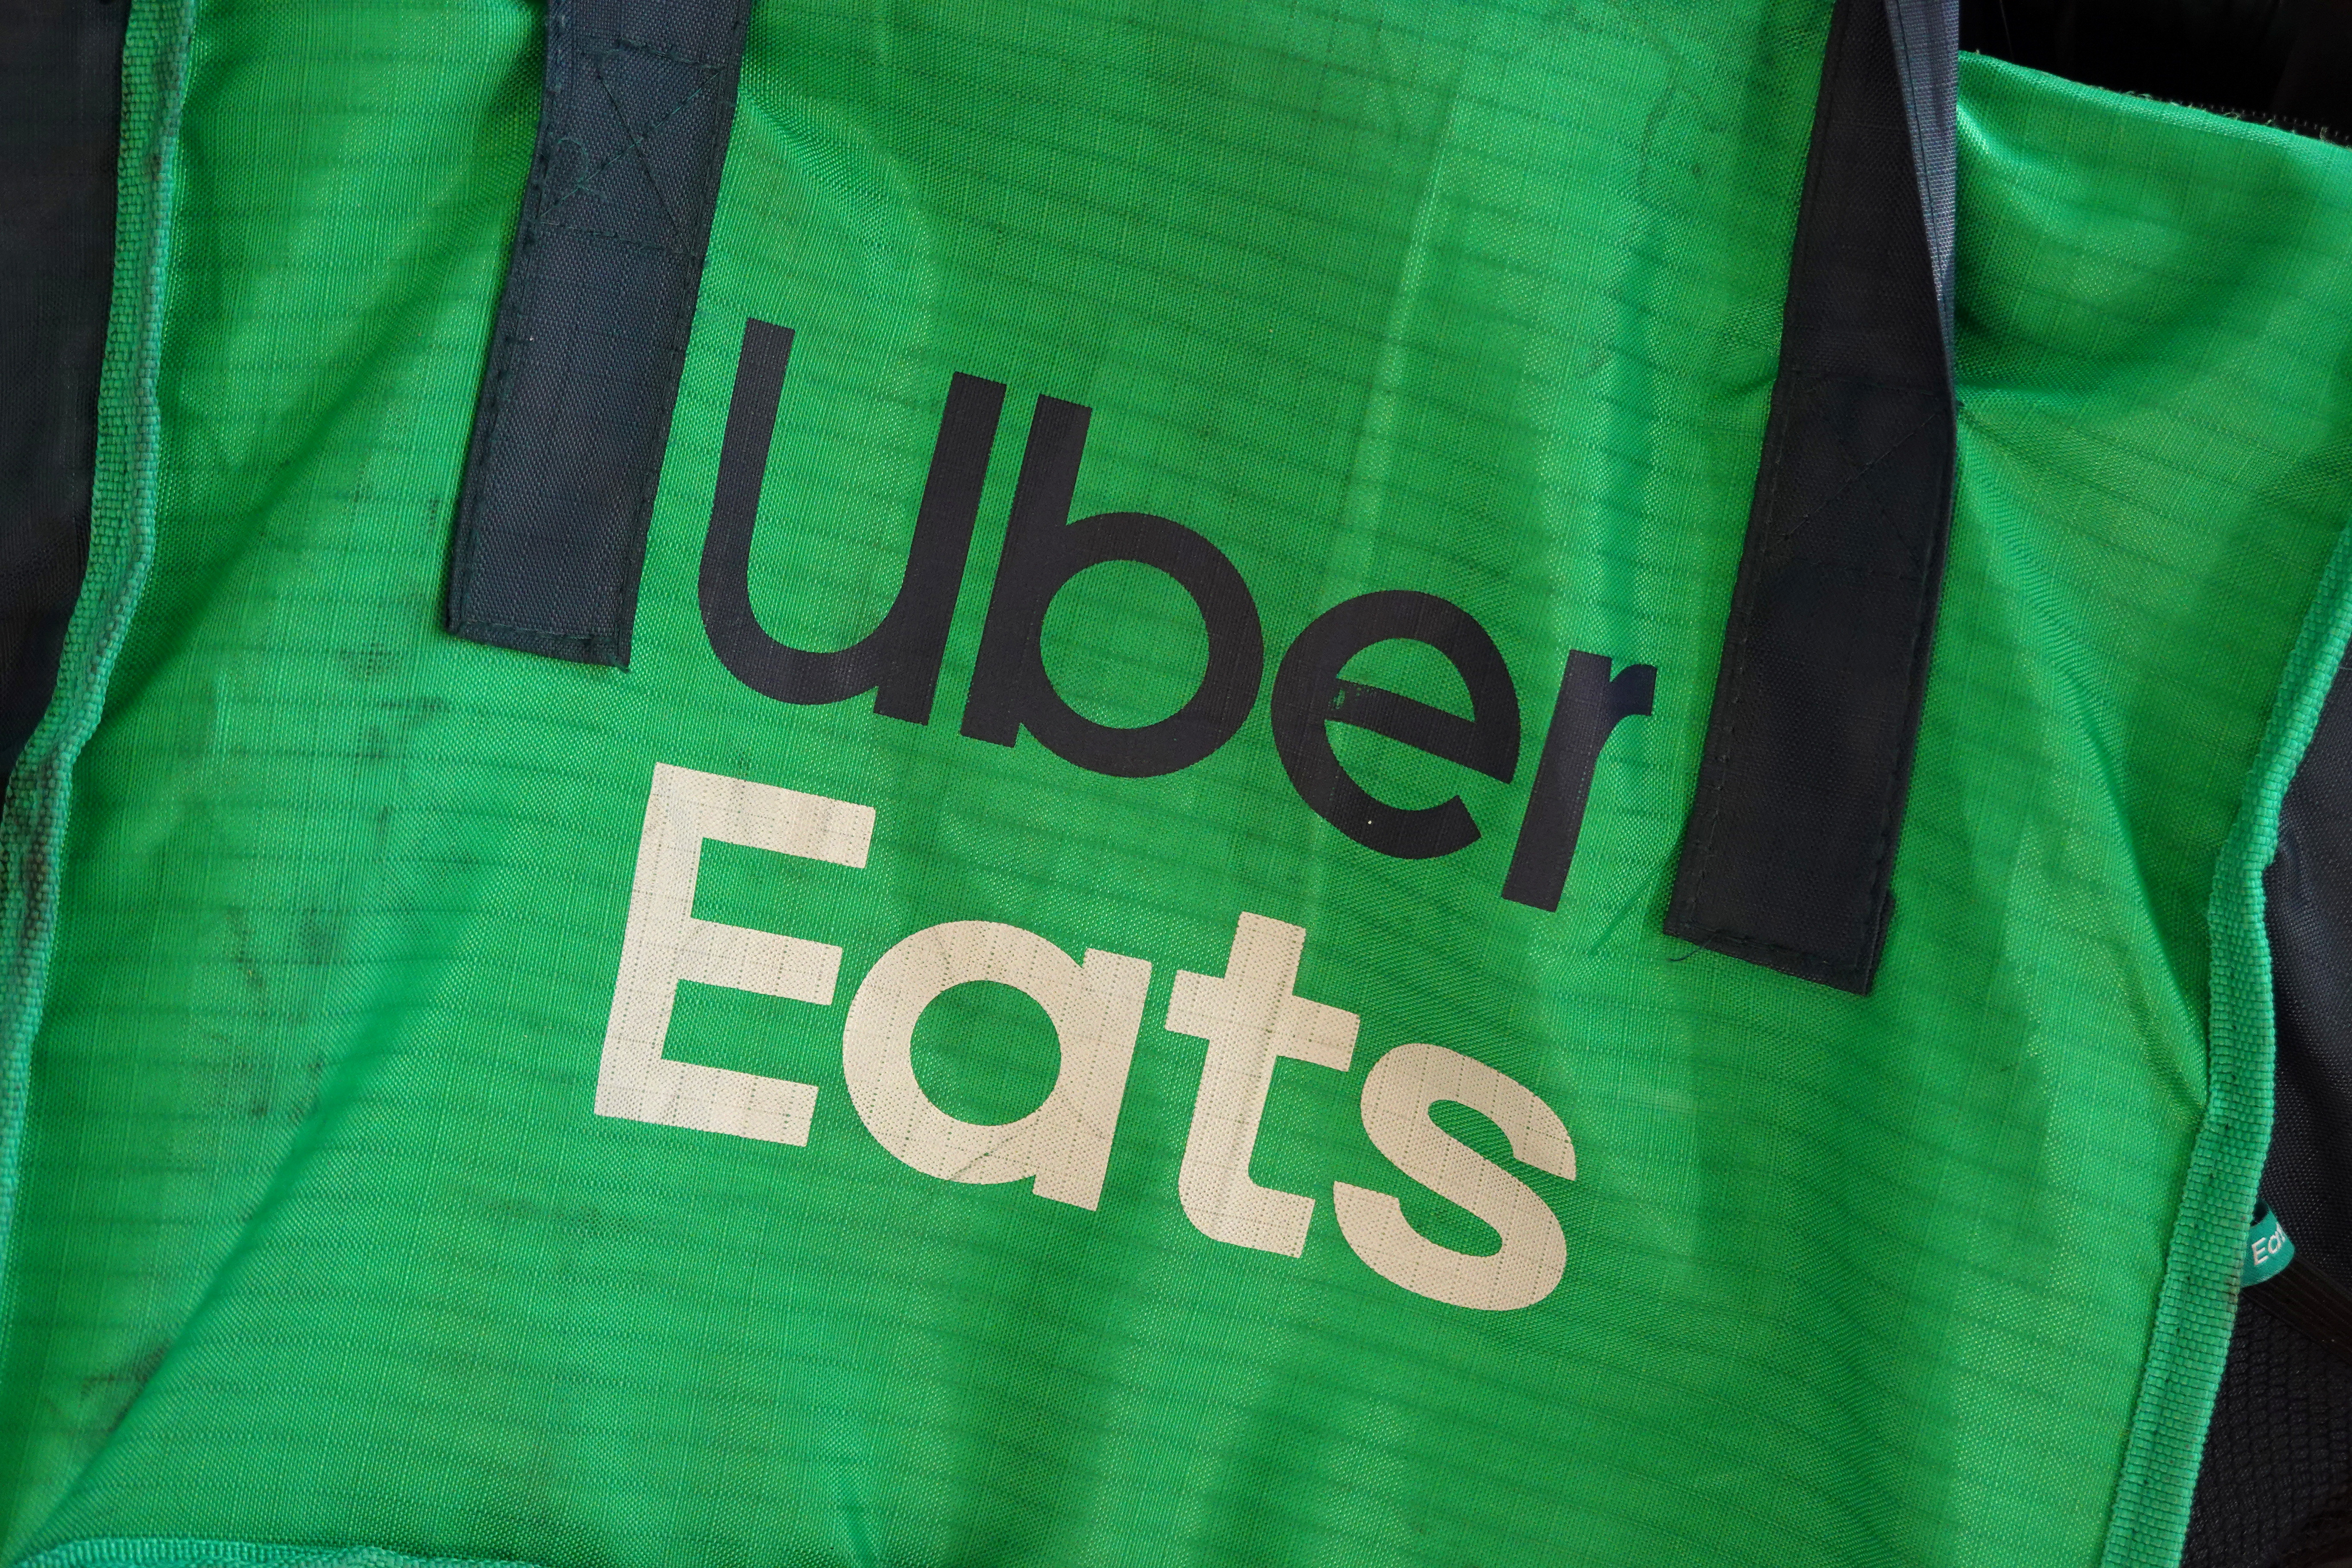 An Uber Eats delivery bag is seen on a bicycle in Brooklyn, New York City